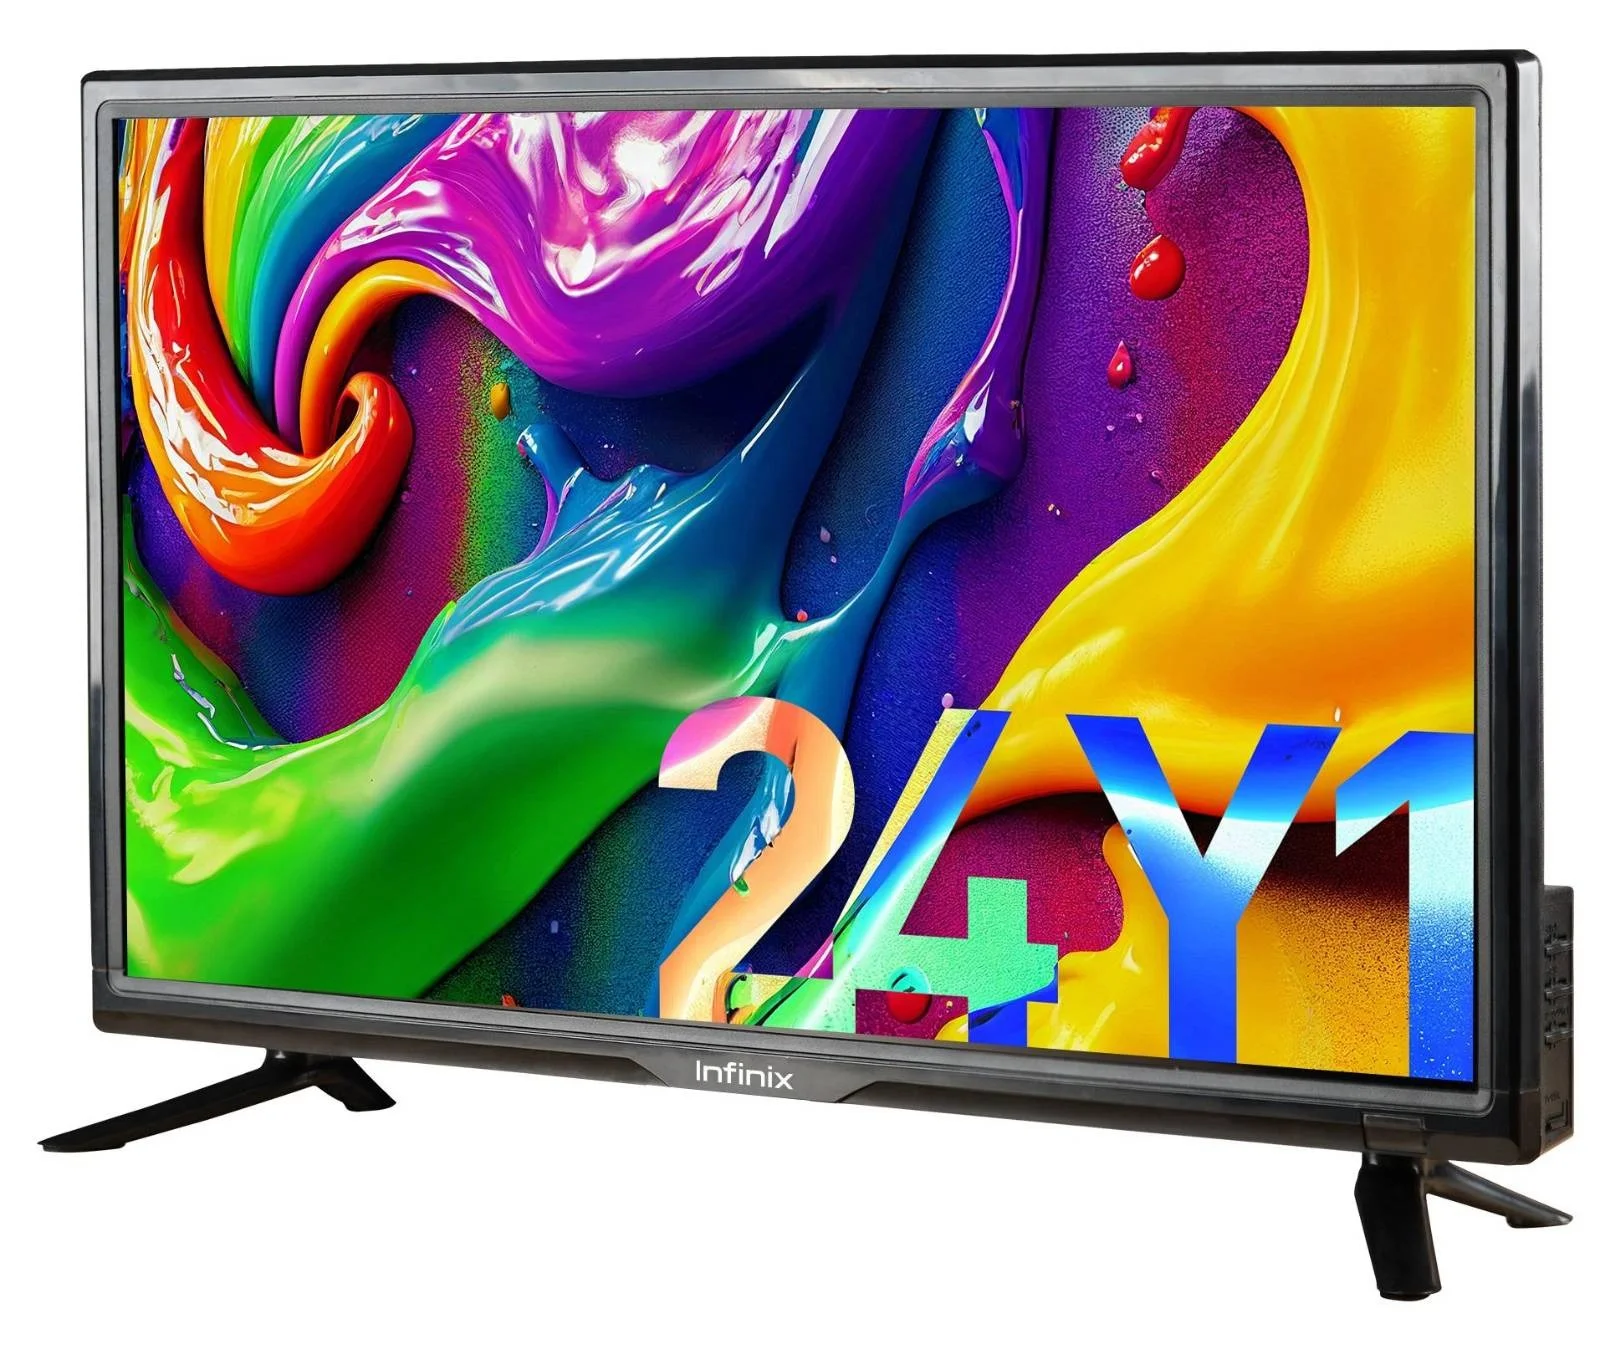 Infinix introduces the 24” Y1 Smart TV image